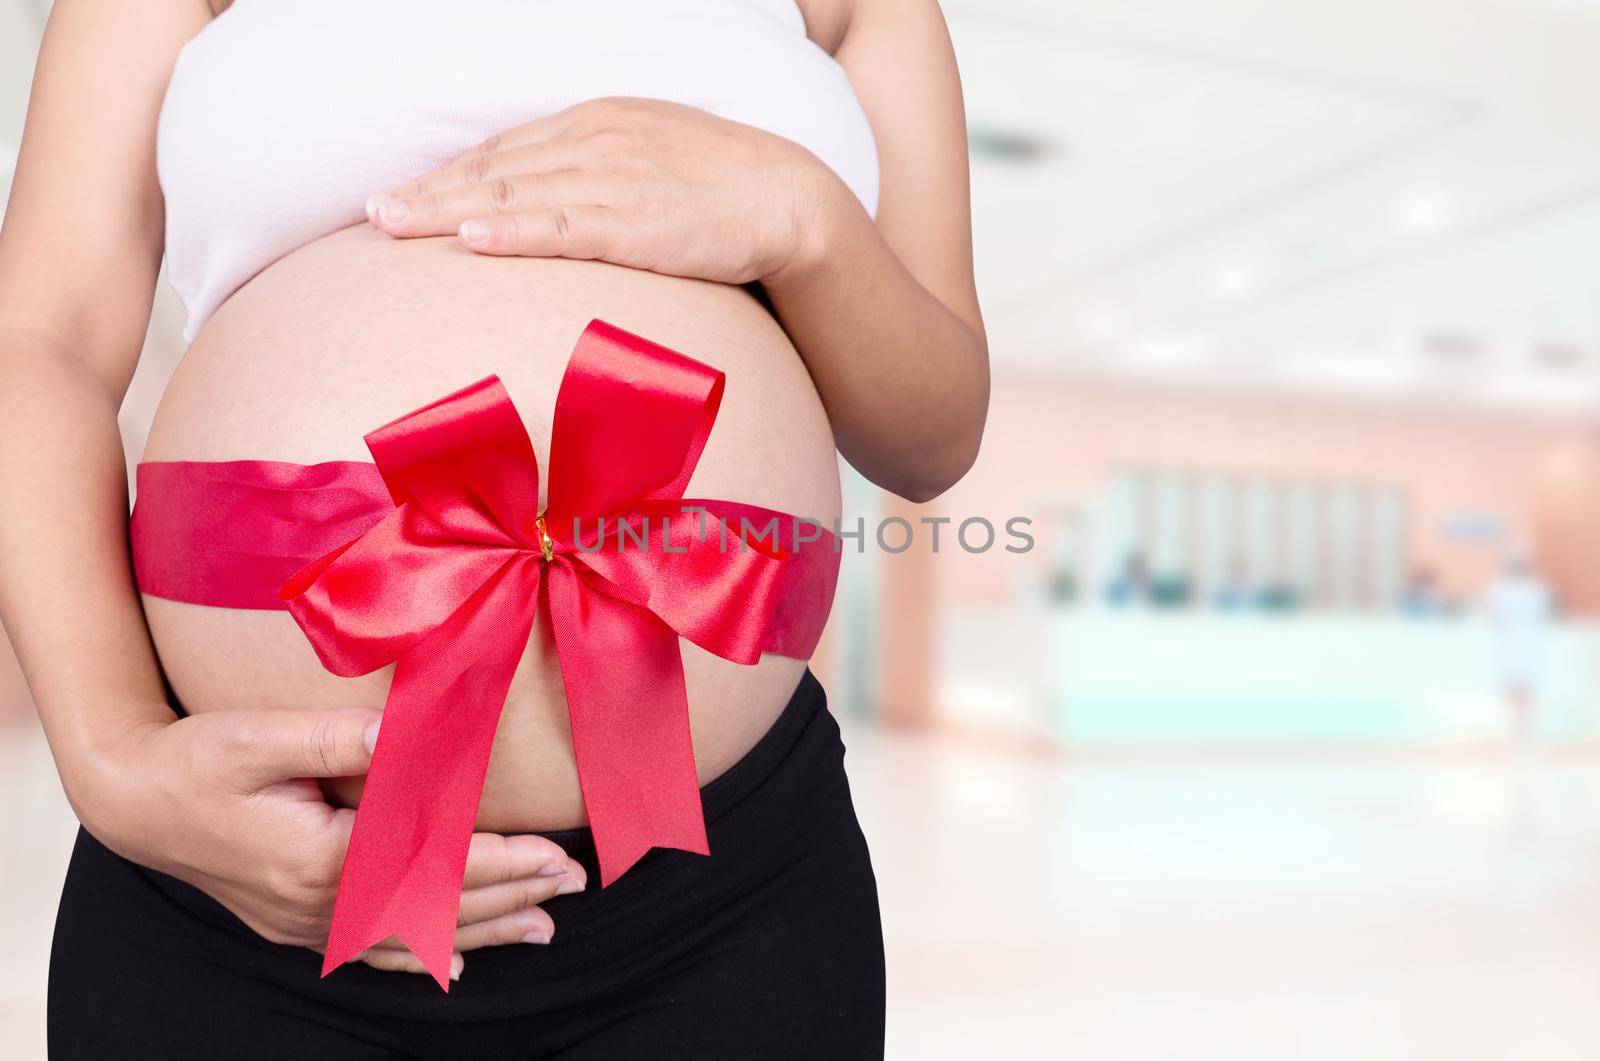 close up pregnant woman with red ribbon gift on belly in hospital background